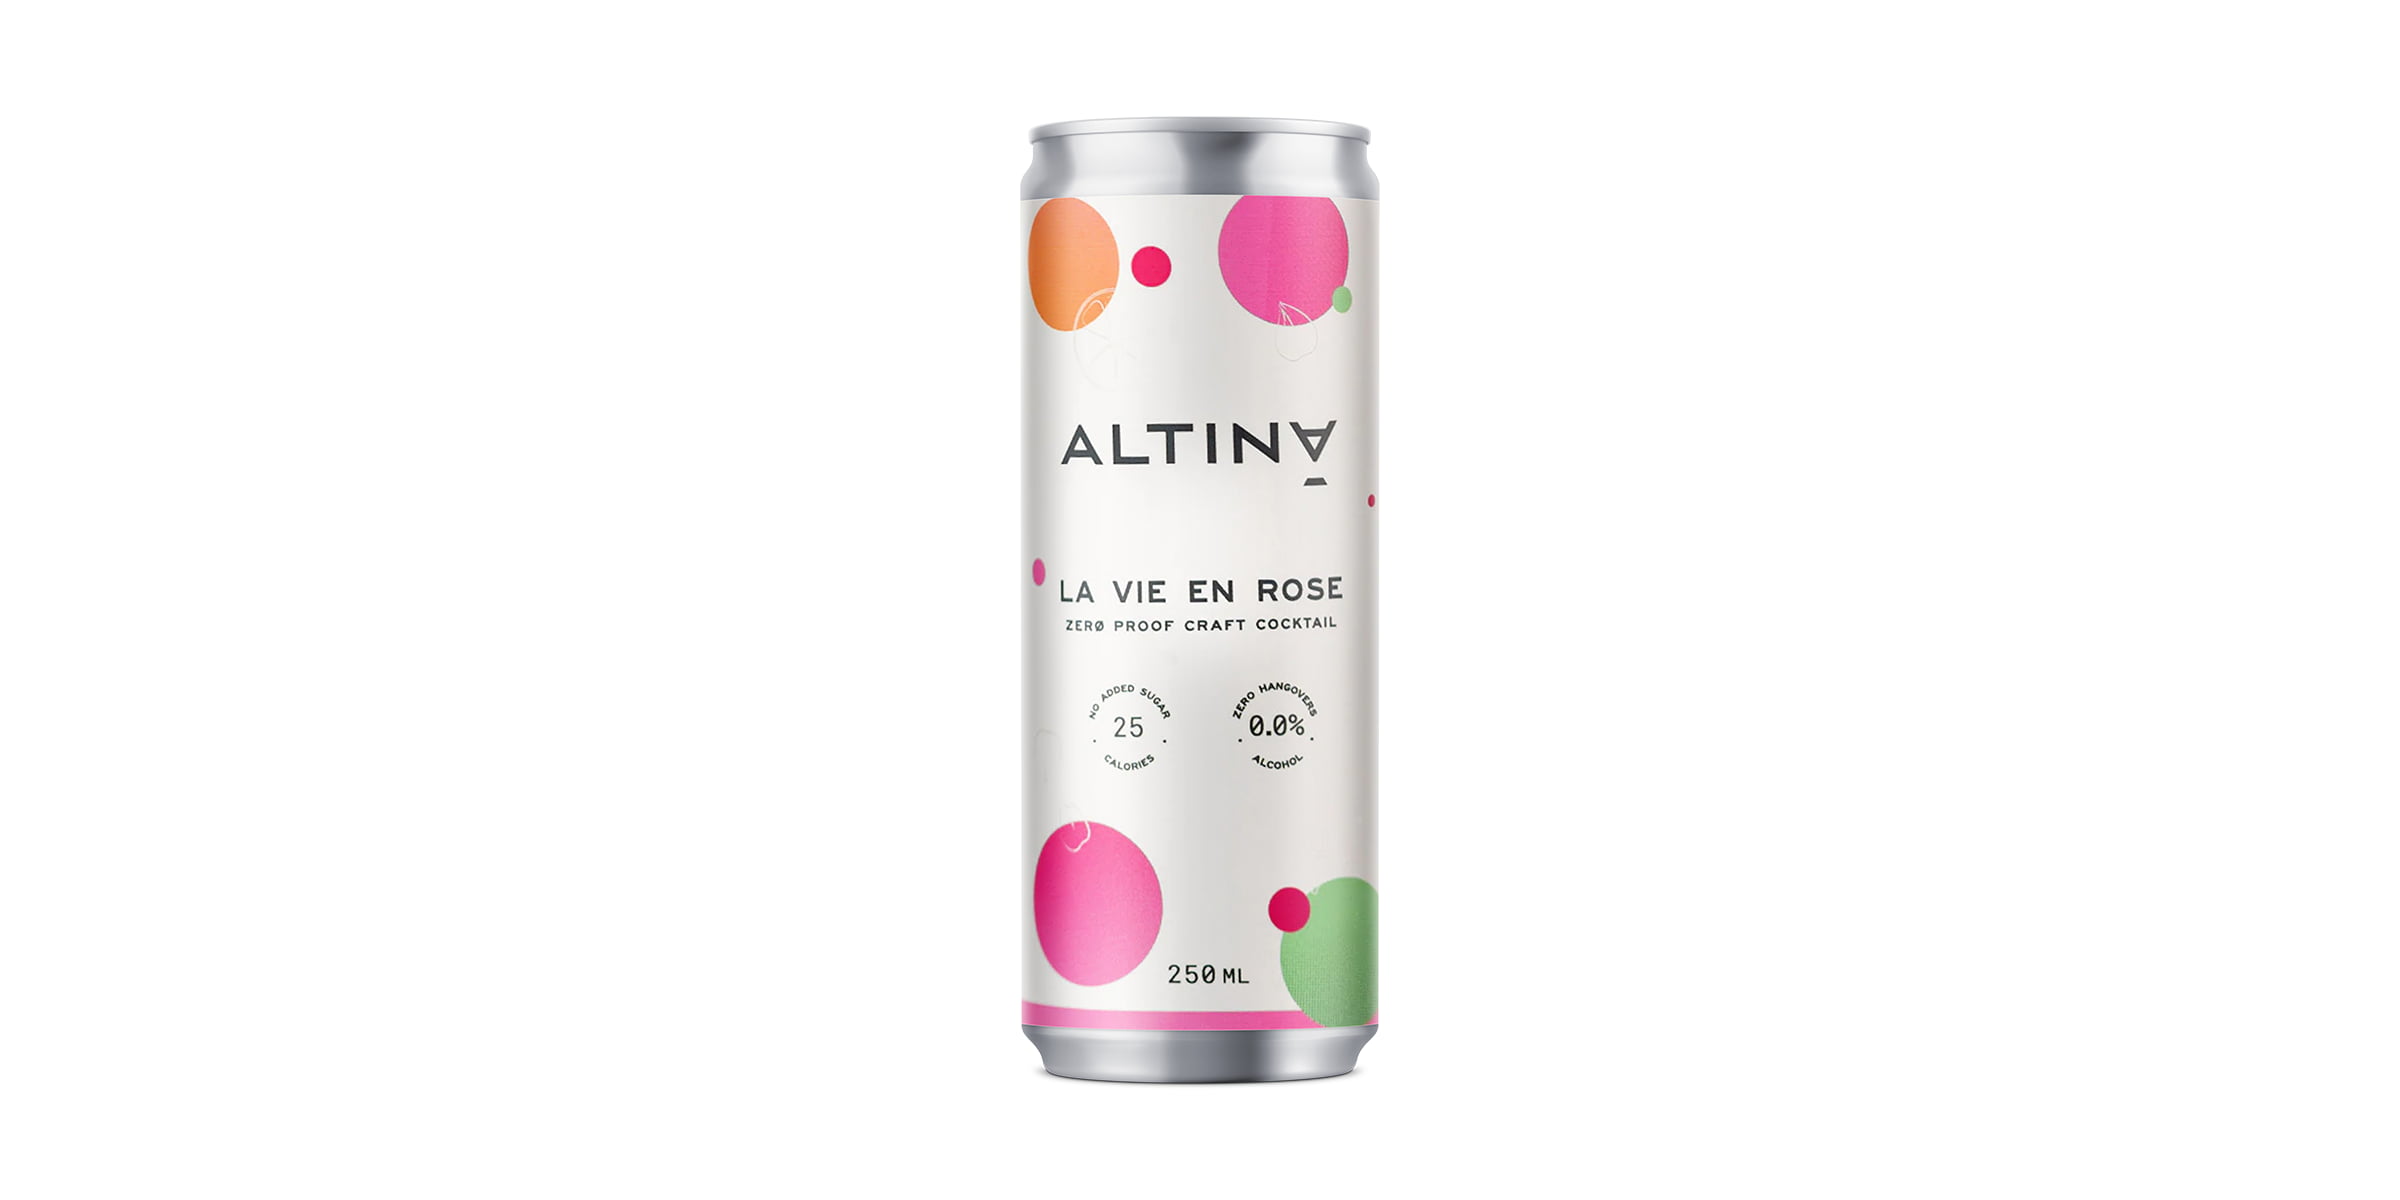 Altina-packaging-before-non-alcoholic-beverage